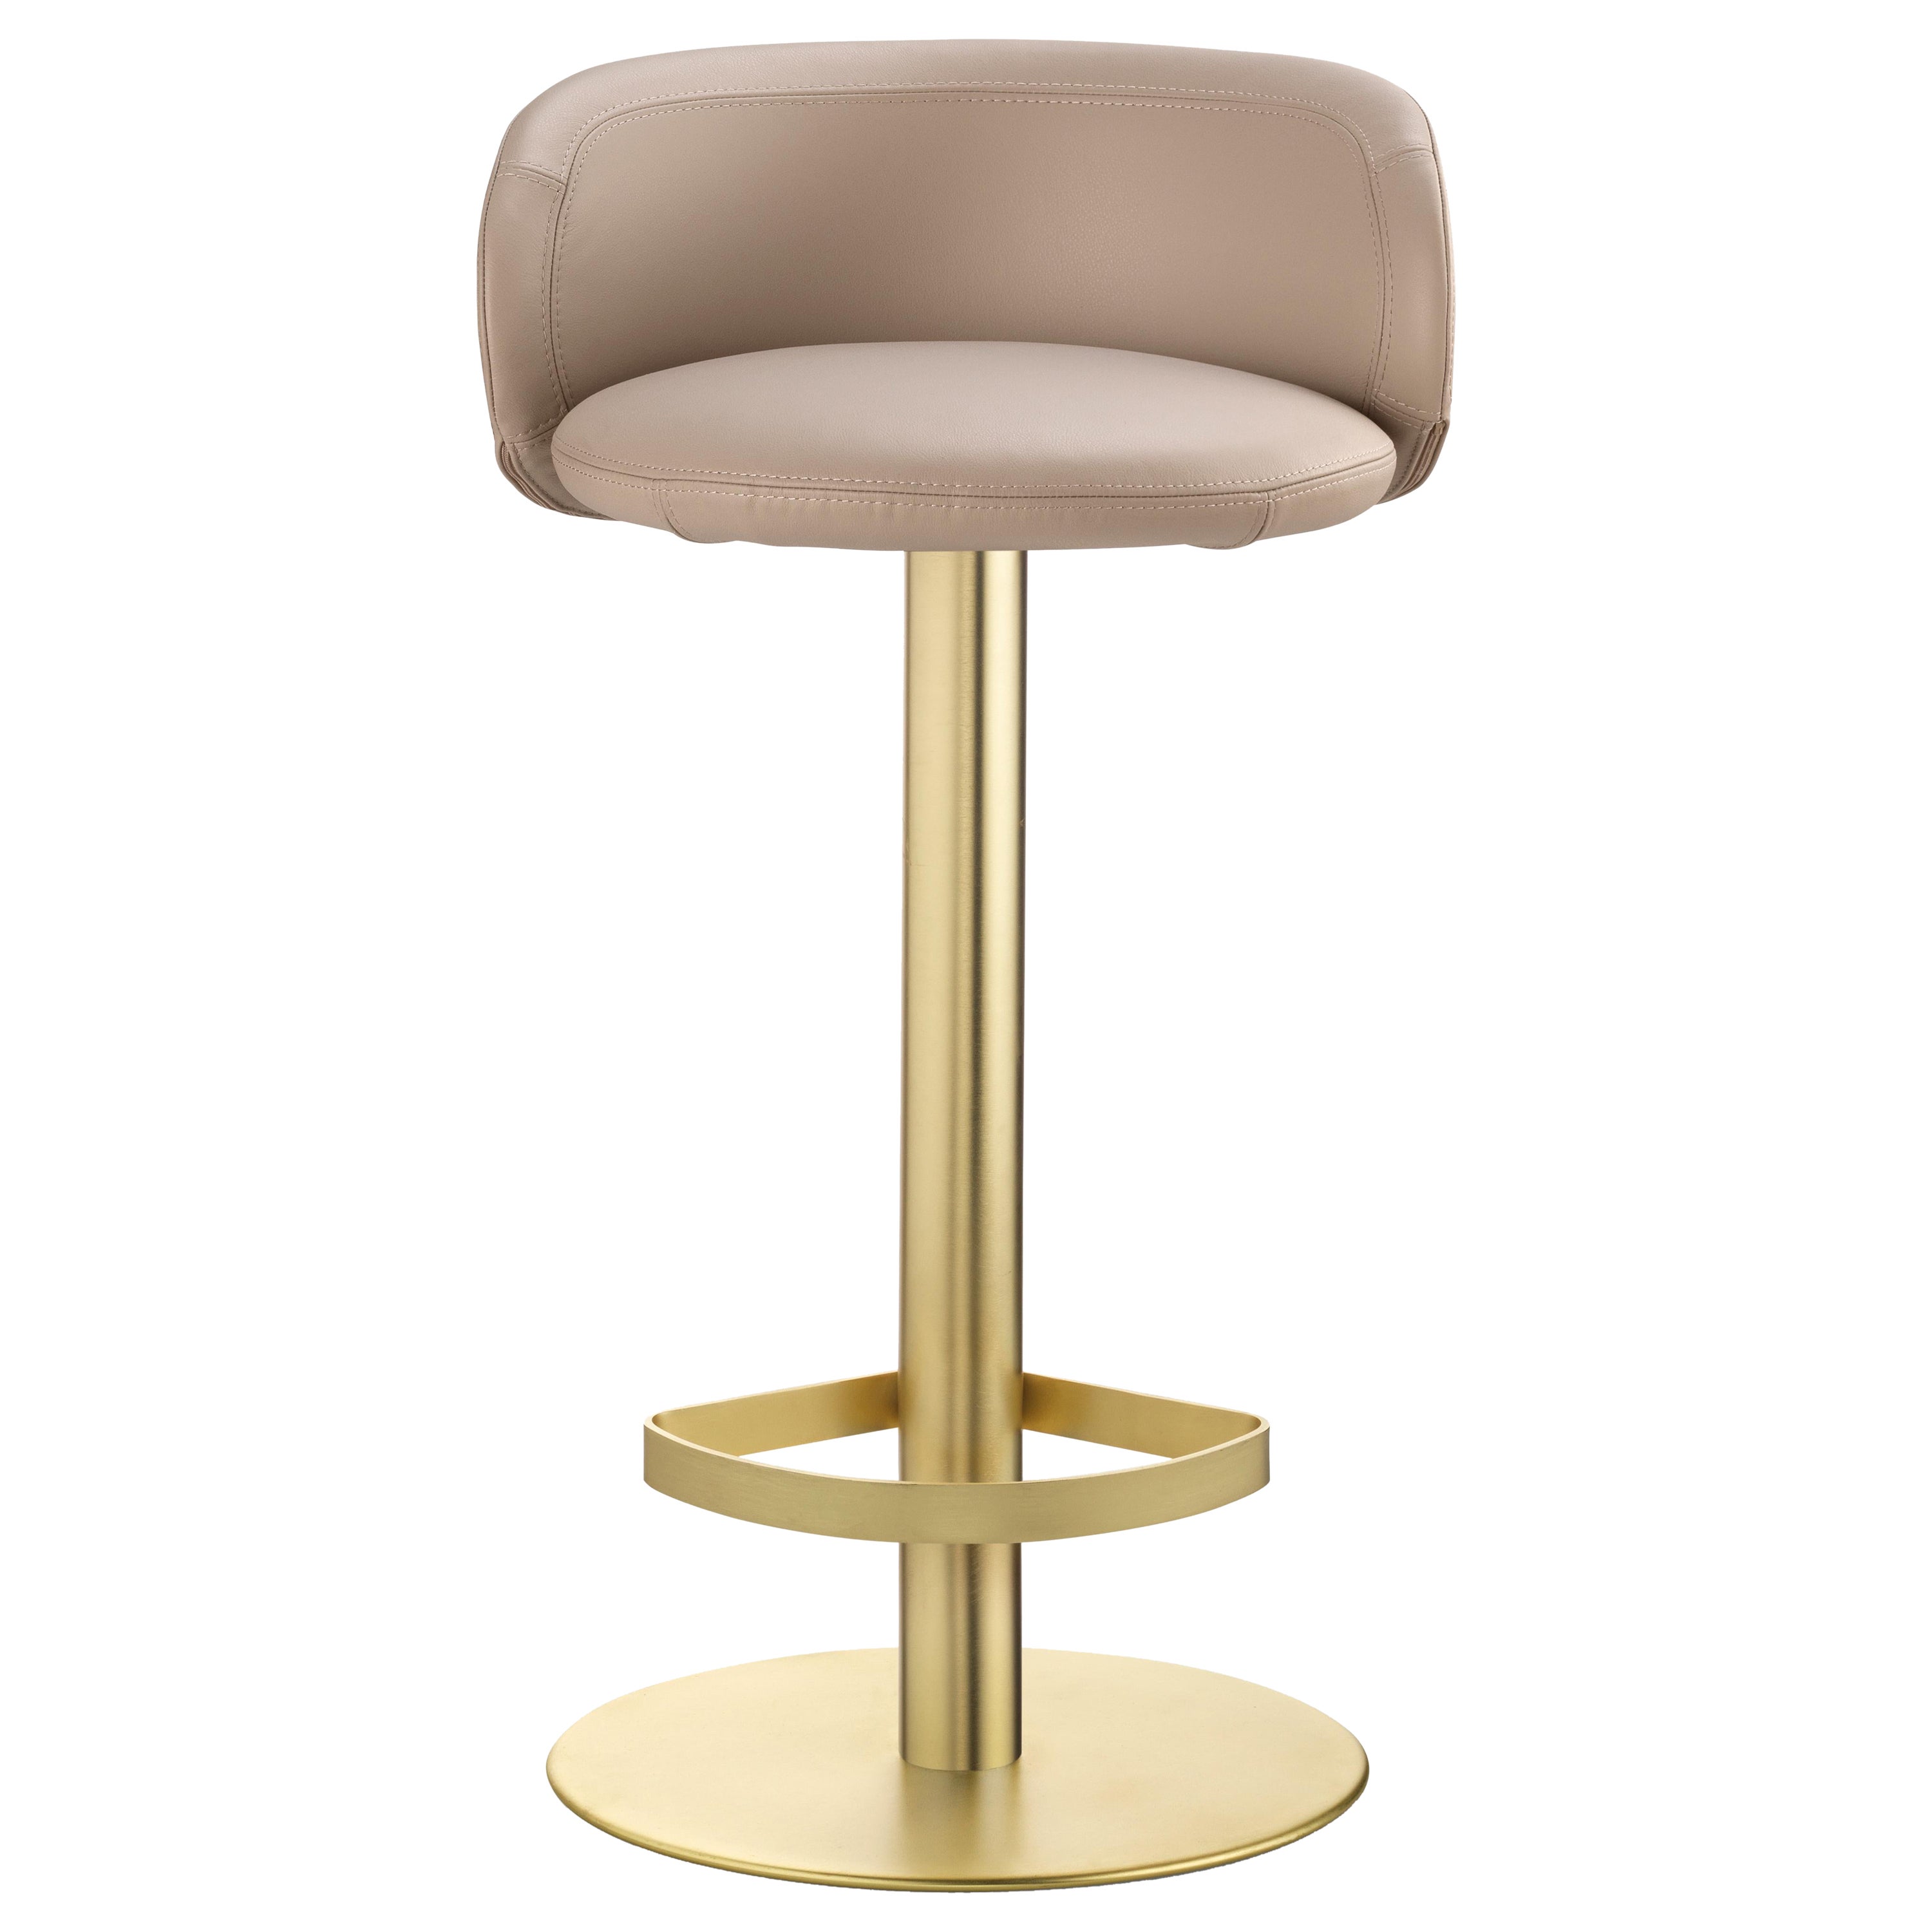 Hillary Stool Leather and Satin brass Structure, Made in Italy